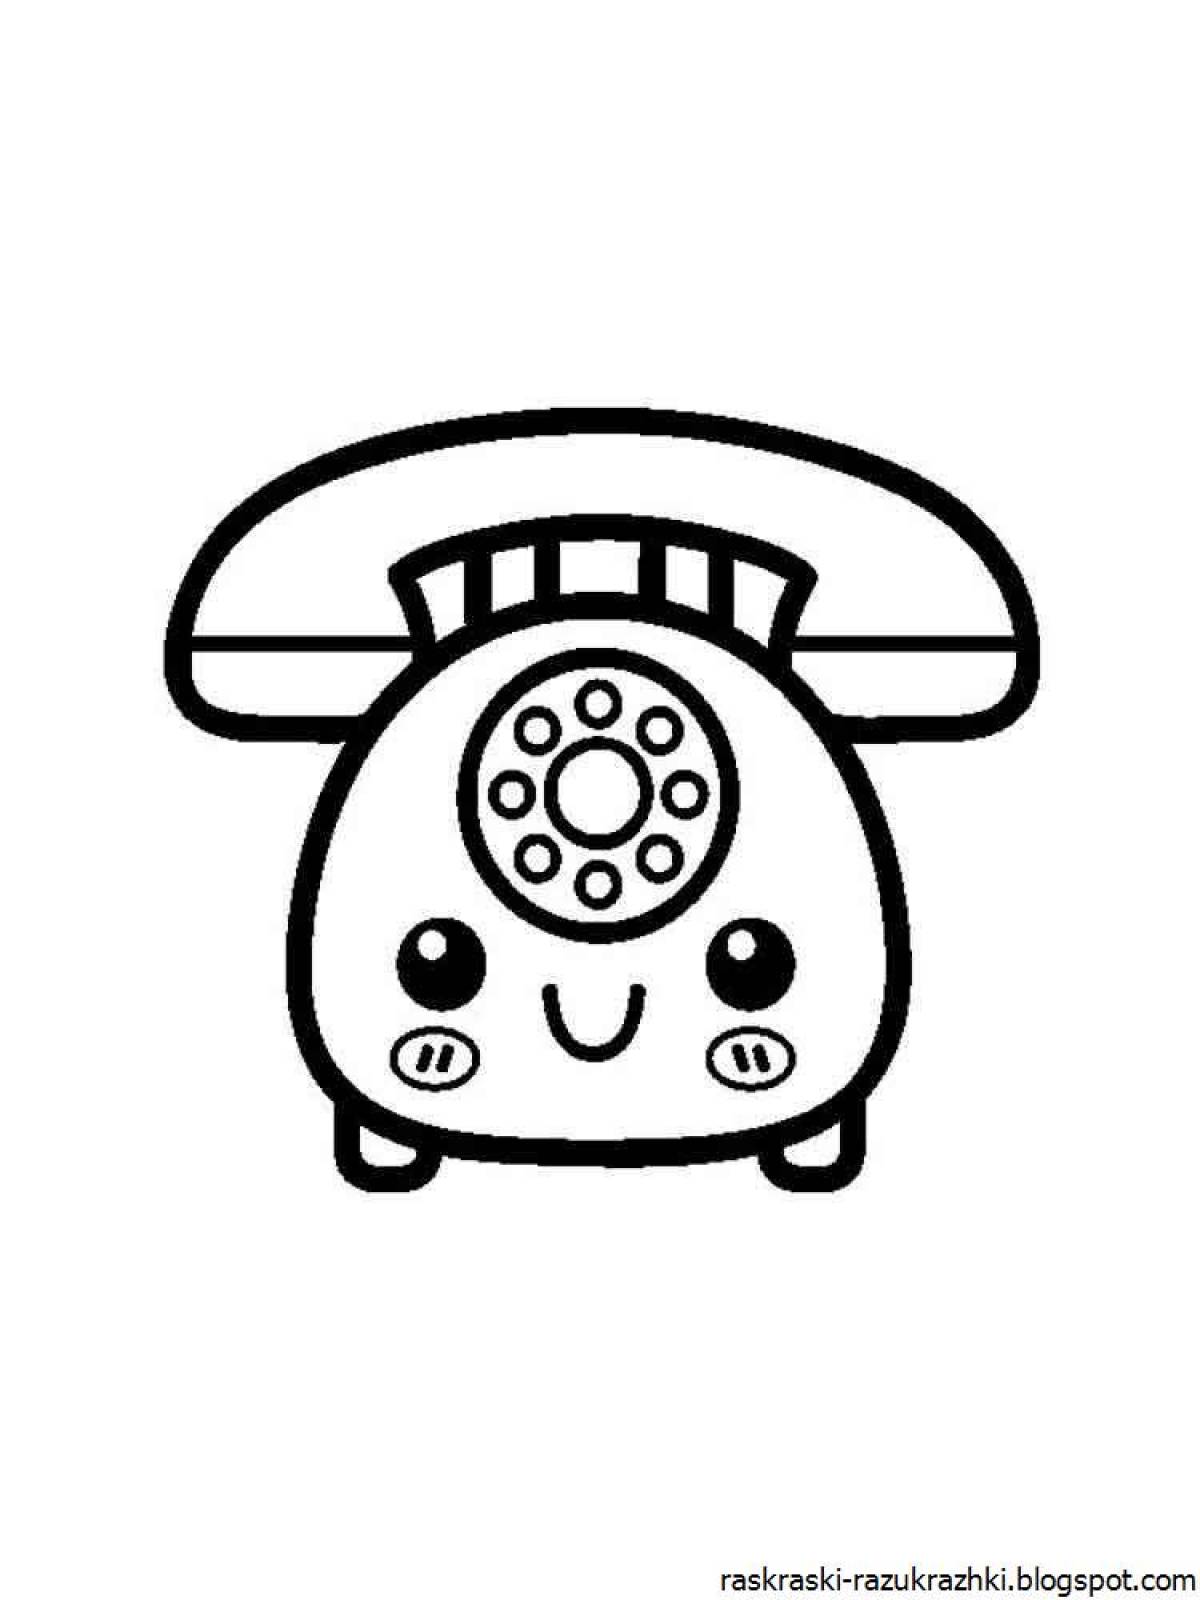 Junior phone playful coloring page